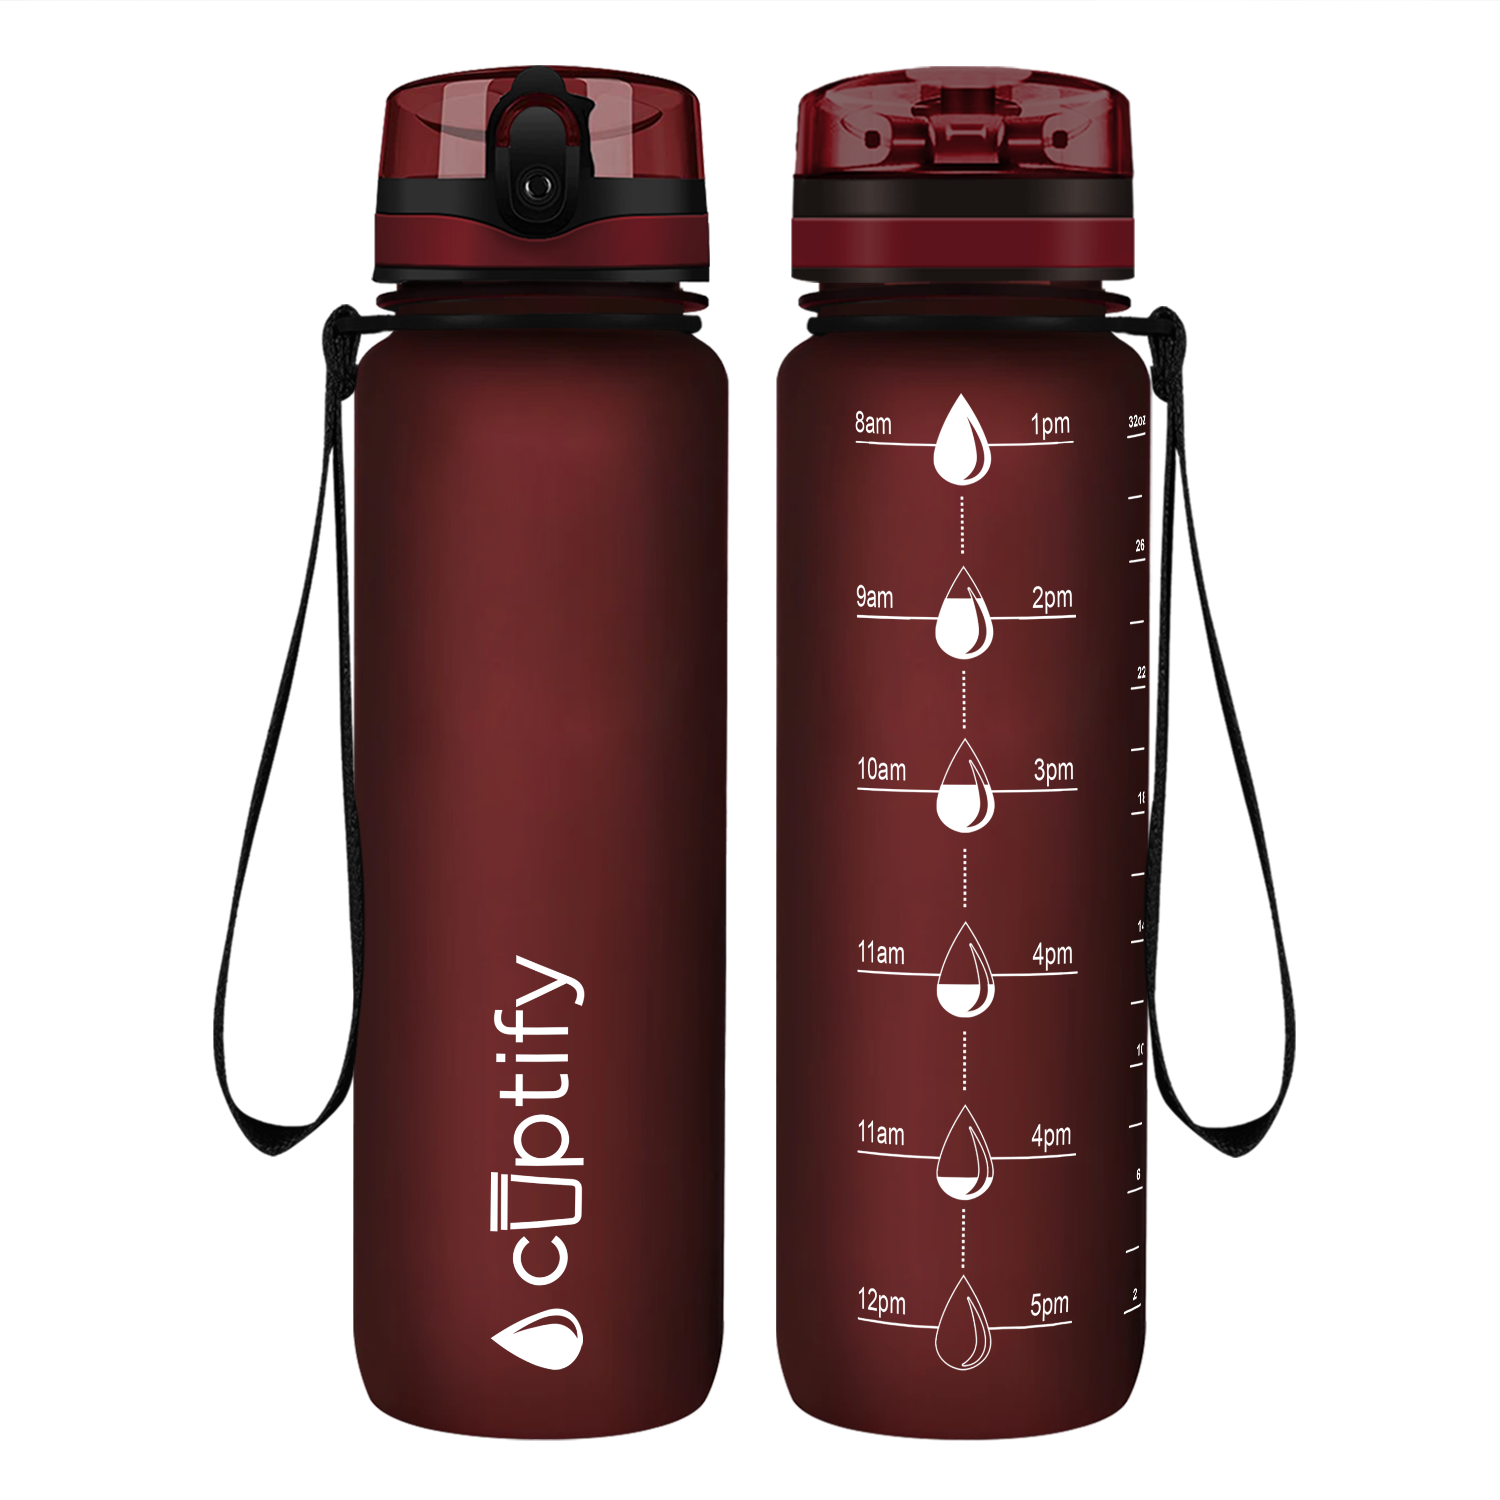 Cuptify Maroon Frosted Hydration Tracker Water Bottle